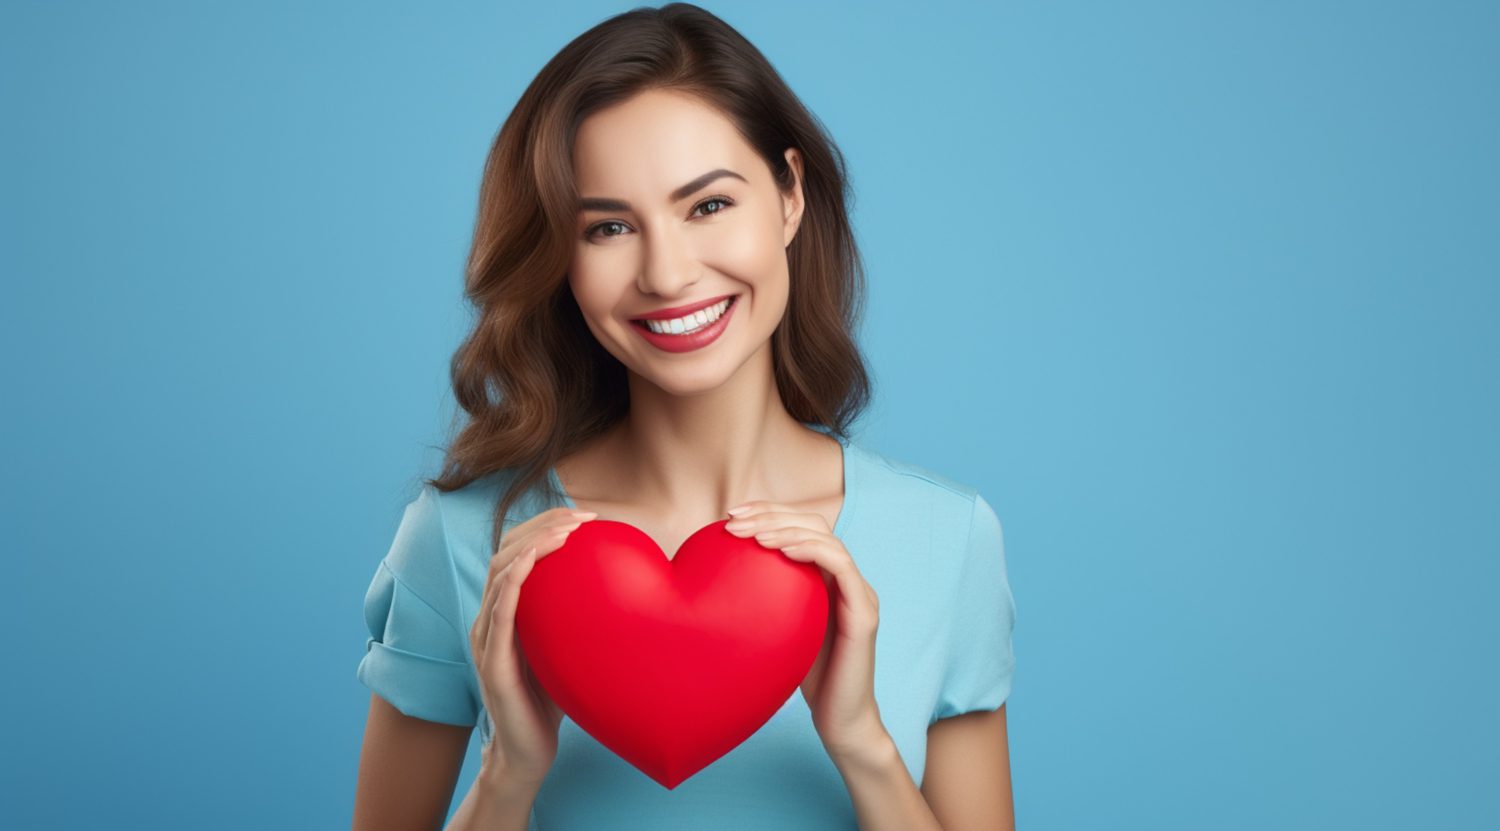 5 Must-Know Facts For a Healthy Heart